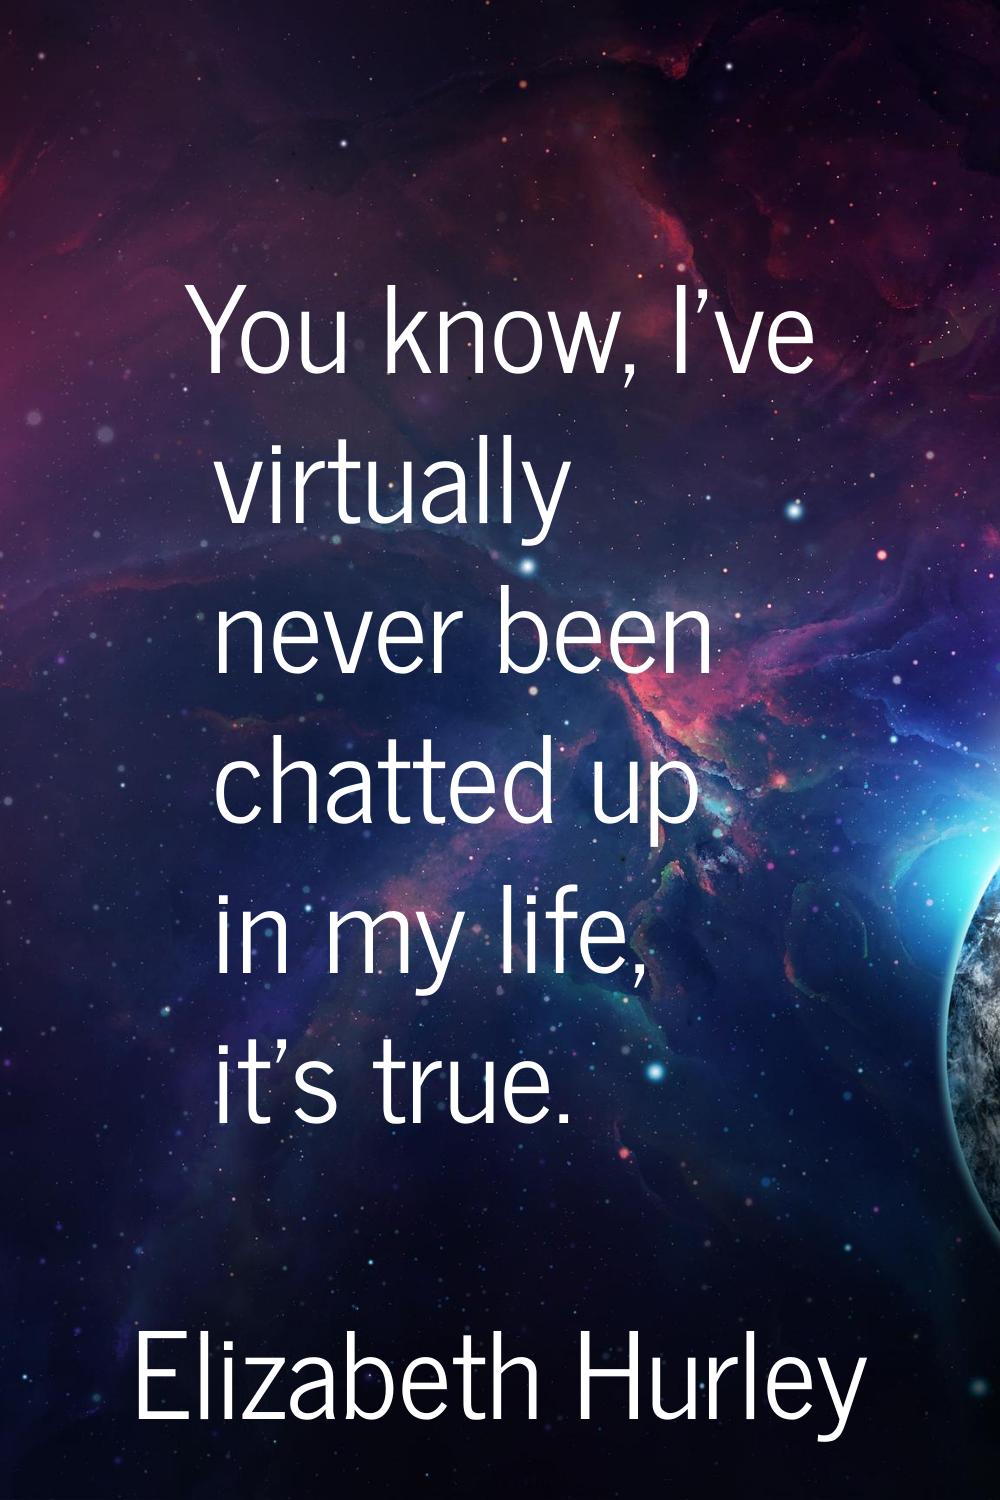 You know, I've virtually never been chatted up in my life, it's true.